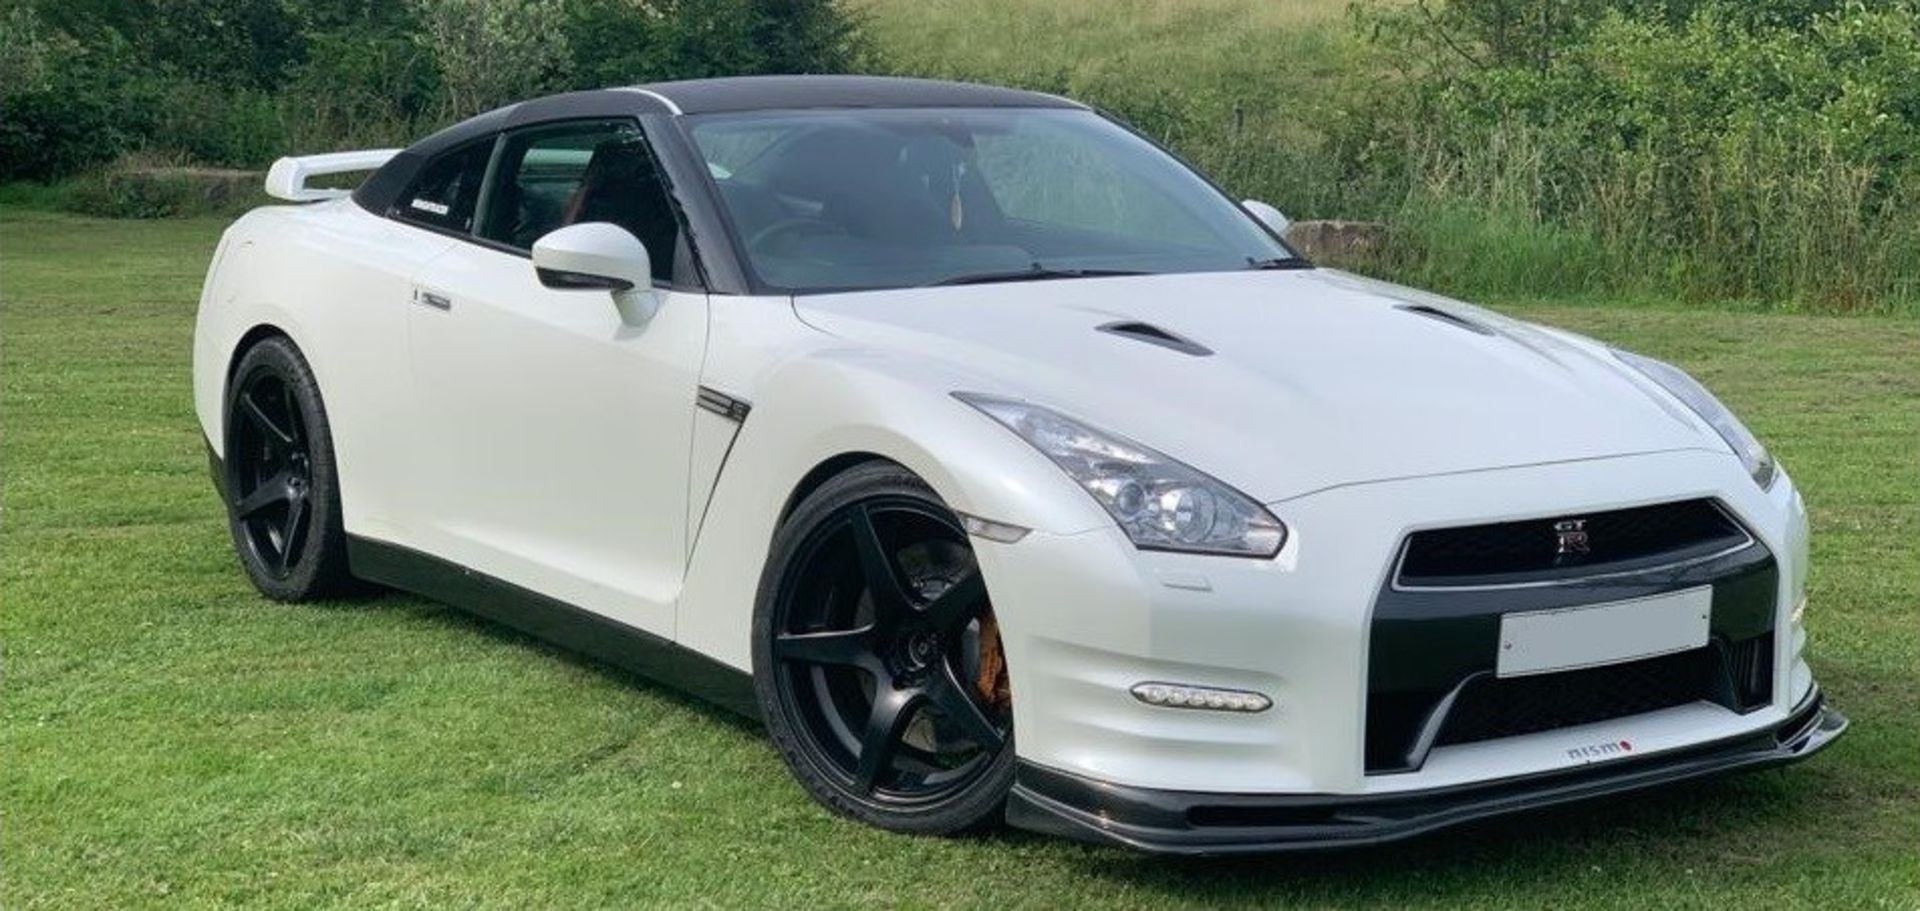 2011/11 REG NISSAN GT-R R35 PREMIUM EDITION S-A ONE FORMER KEEPER FROM NEW 22K MILES - WARRANTED!